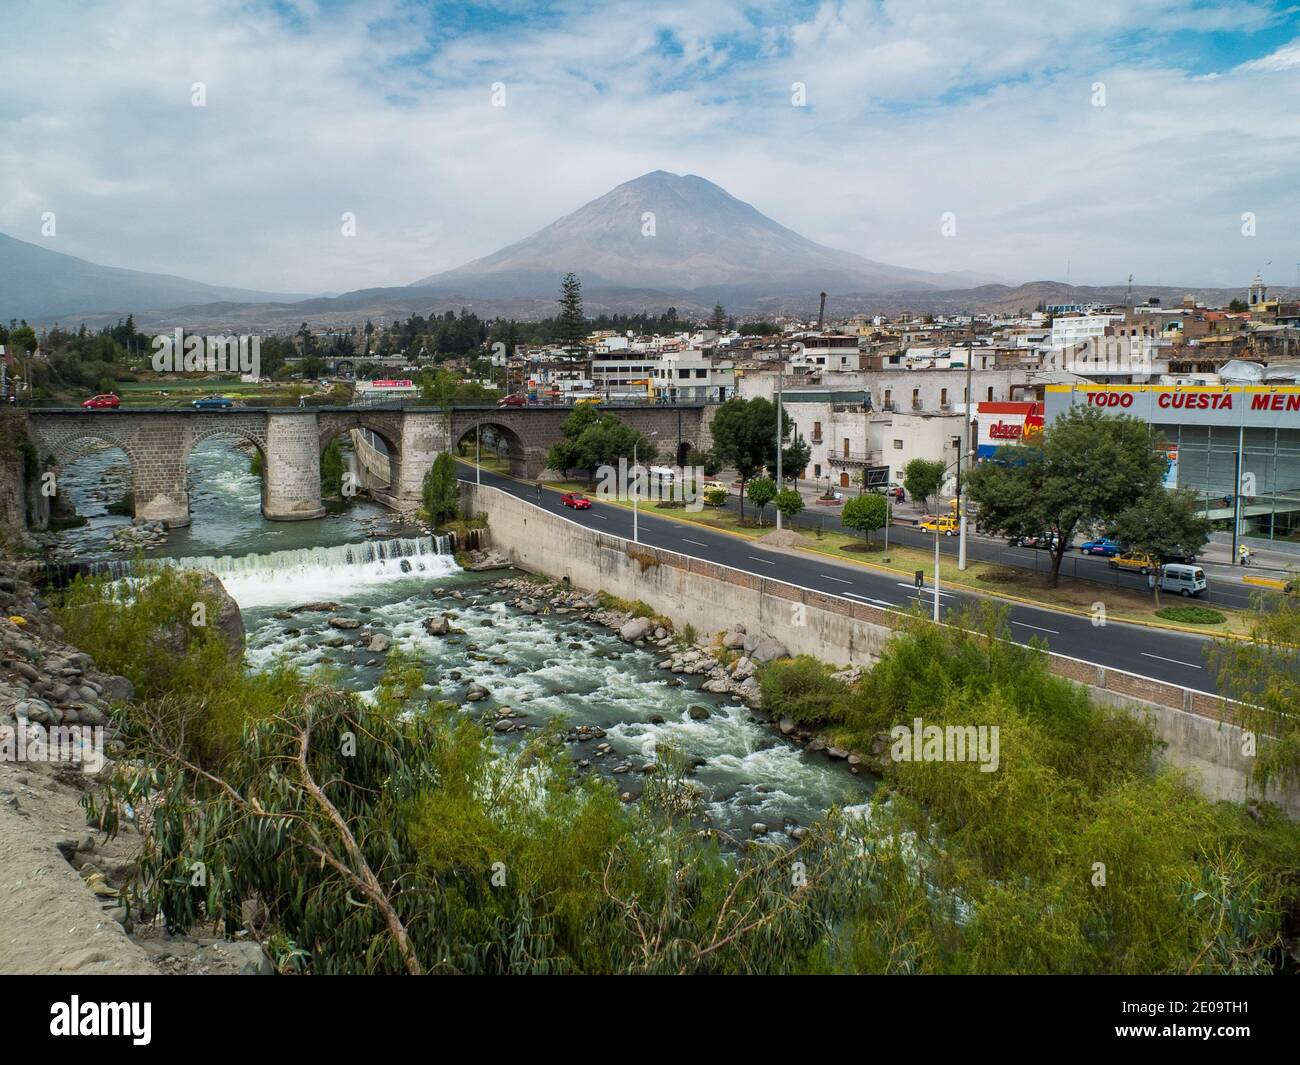 The Rio Chili flowing through the city of Arequipa, Peru. The volcano Misti can be seen in the distance Stock Photo